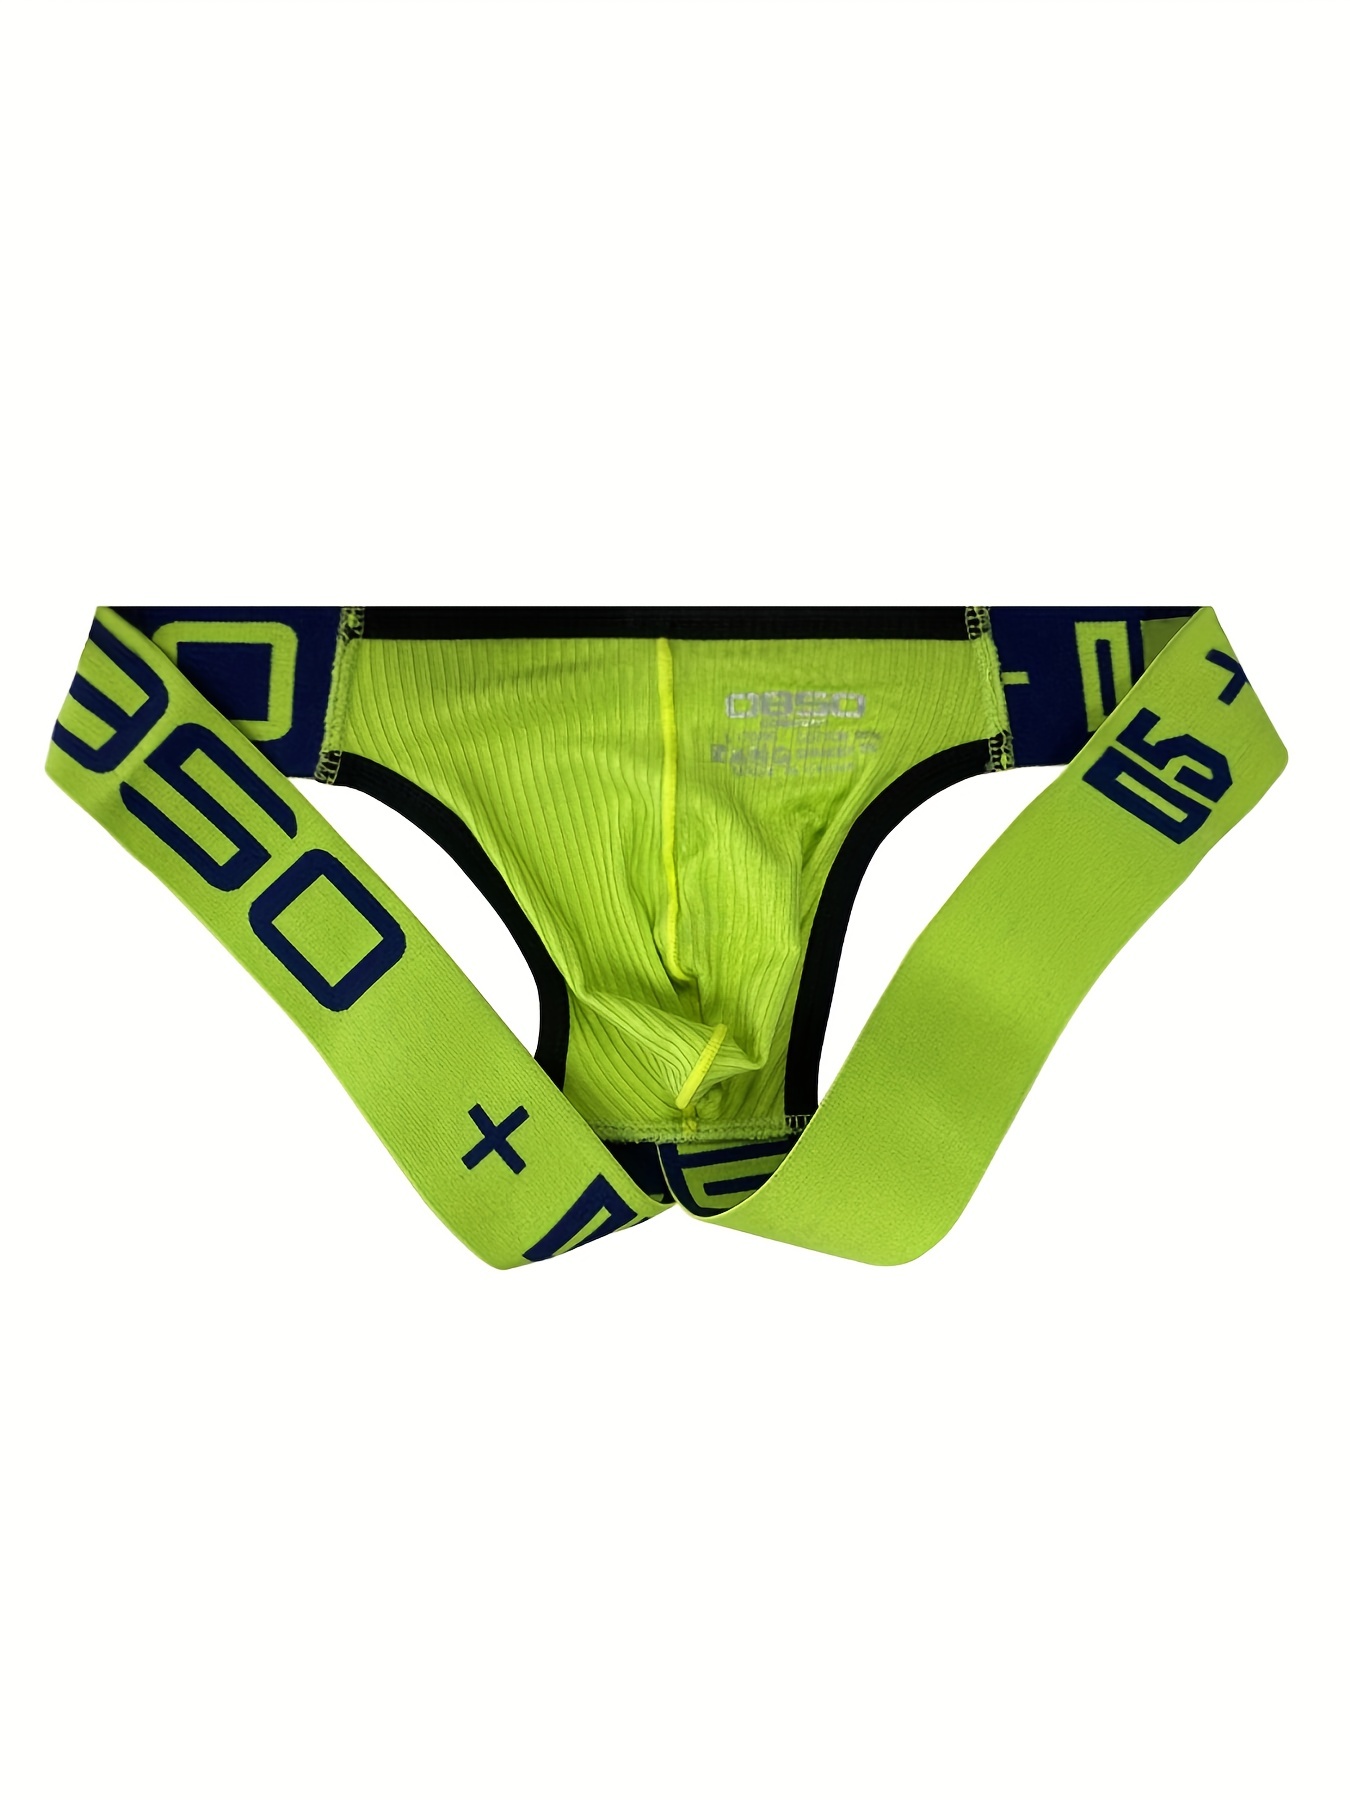 SALE - Mens Spandex Thong with Extra Wide Elastic Waistband Neon Green